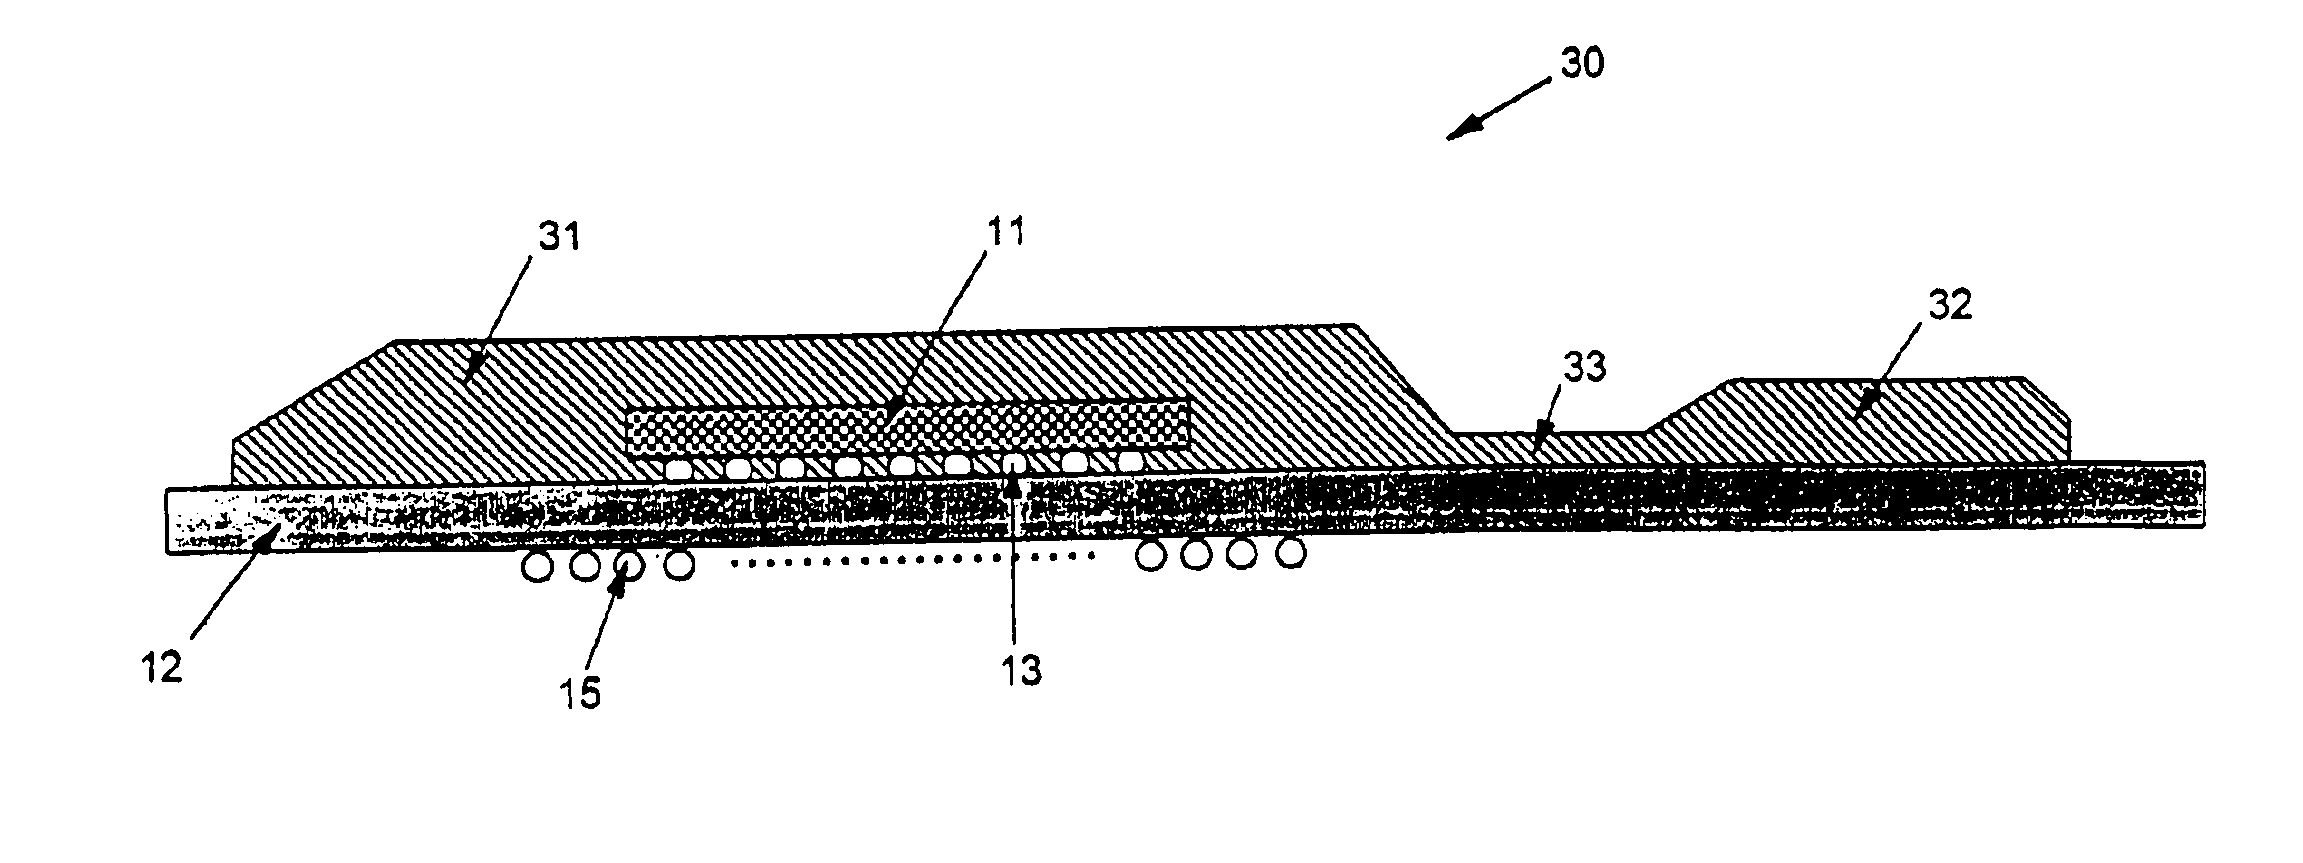 Transfer molding of integrated circuit packages